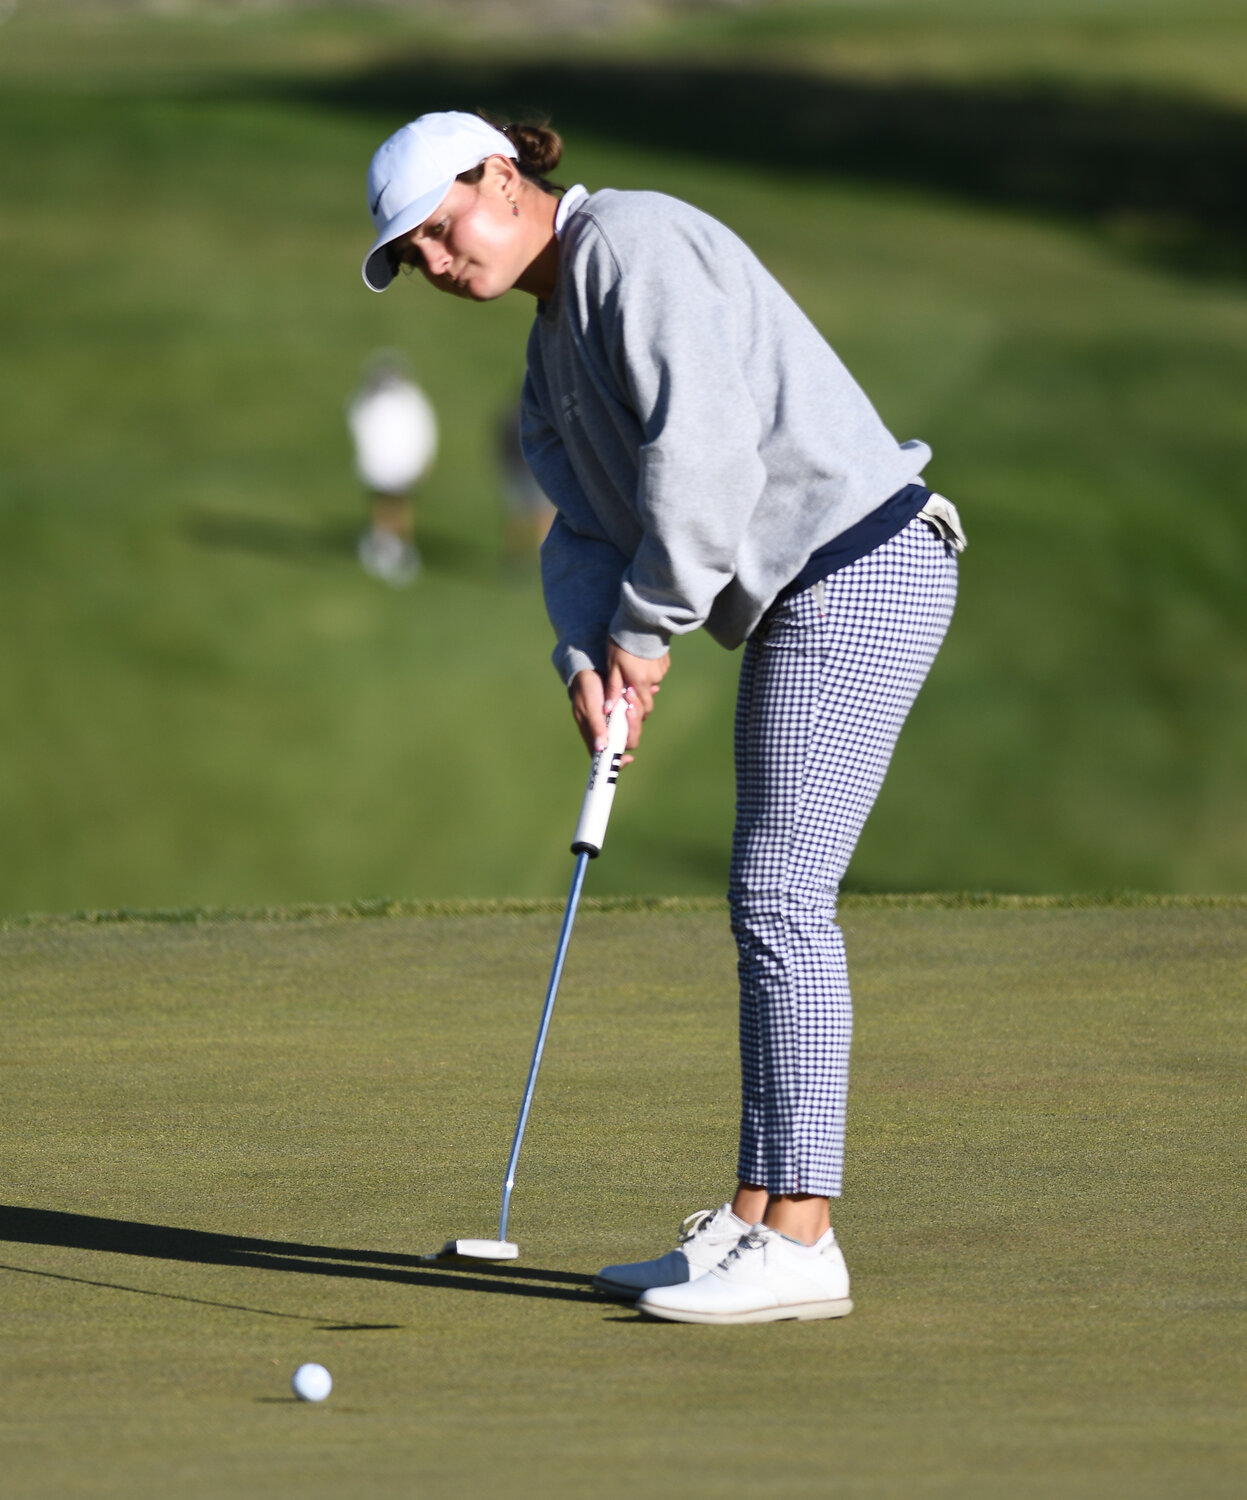 Evanston's Kyra Sponenburgh rolls in a putt during the second round of the WSGA Amateur Championship at the Purple Sage Golf Course. Sponenburgh and Tazlyn Wagner were grouped together Saturday.